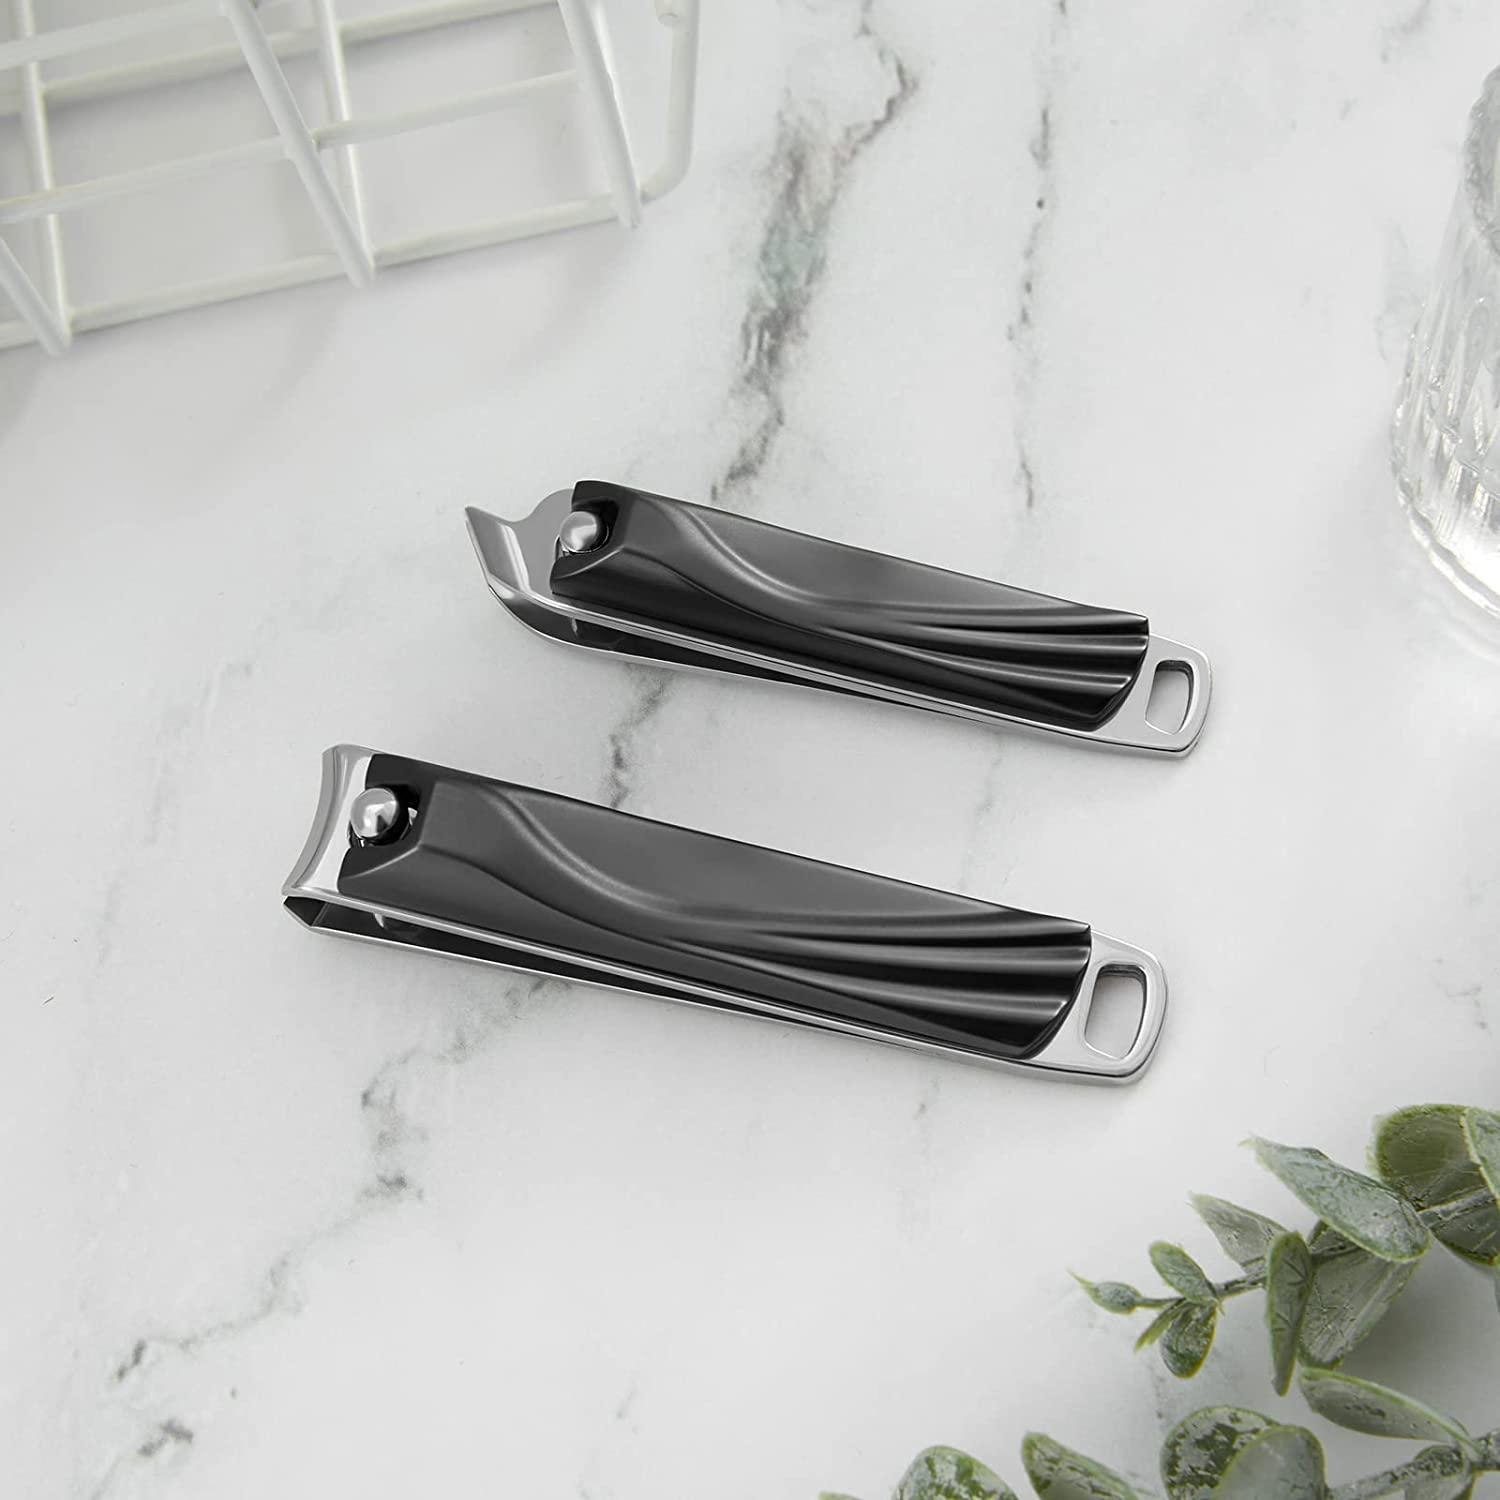 Americanails Pro-Series Stainless Steel Toenail Clipper Curved Blade